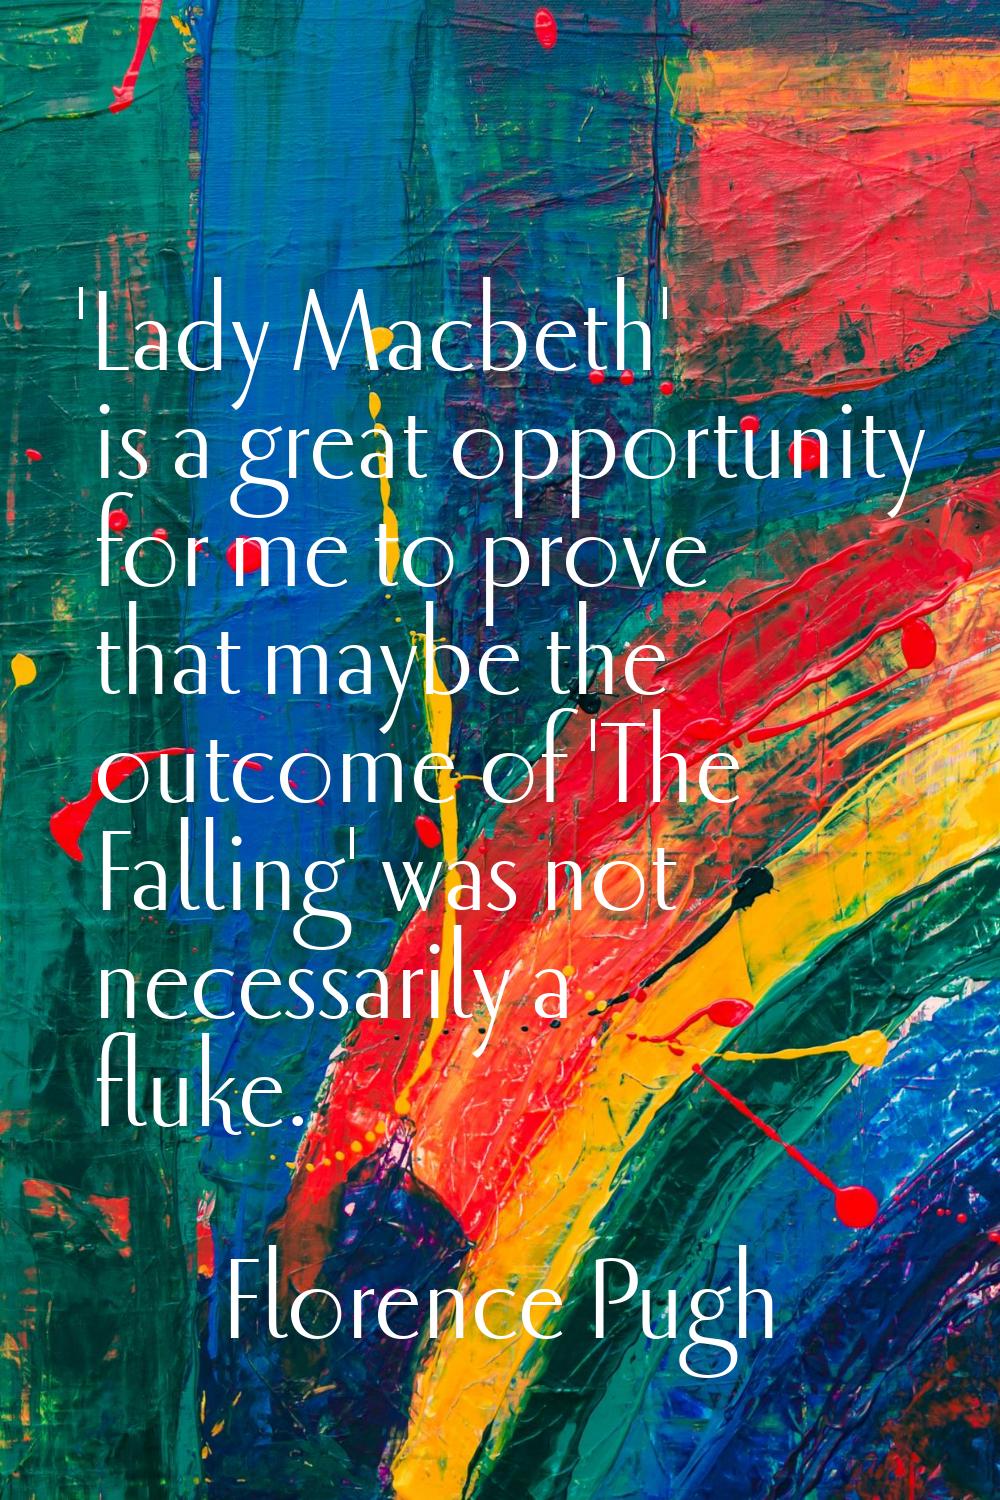 'Lady Macbeth' is a great opportunity for me to prove that maybe the outcome of 'The Falling' was n